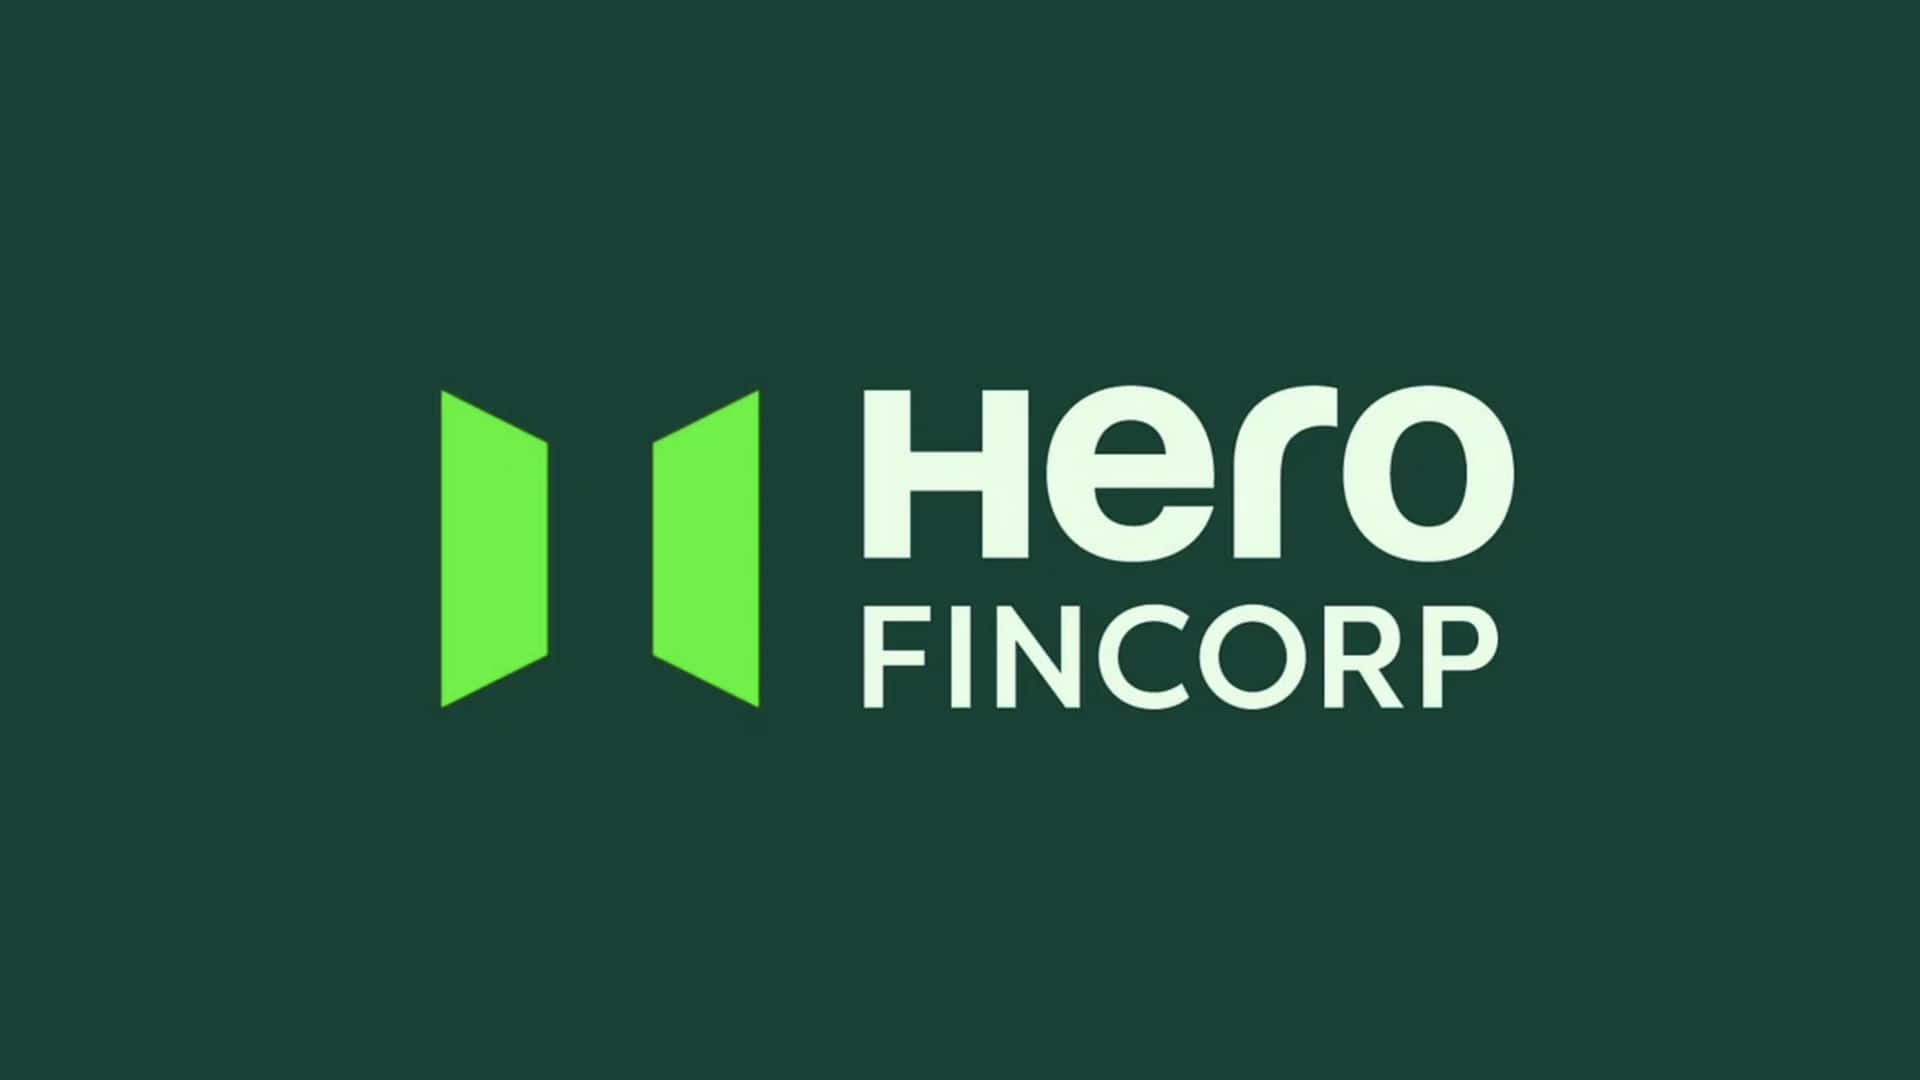 IPO-bound Hero FinCorp clears bad loans worth ₹1,200 crore